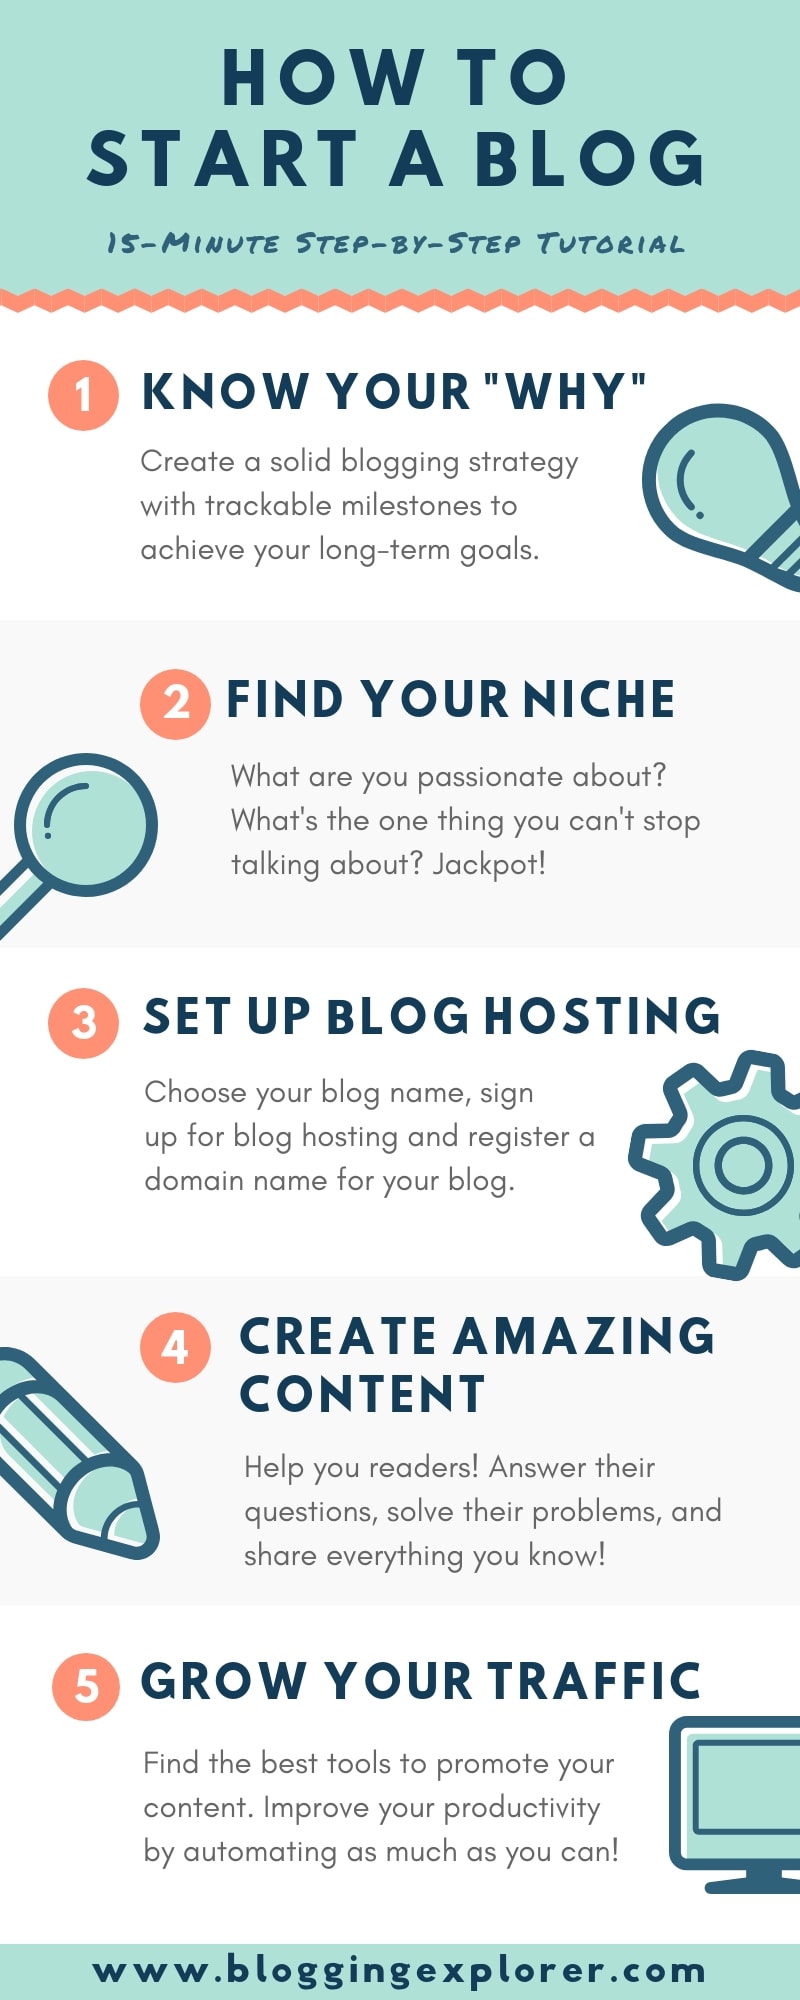 How to Start a Blog in 24 (to Make Money): Free Guide for Beginners